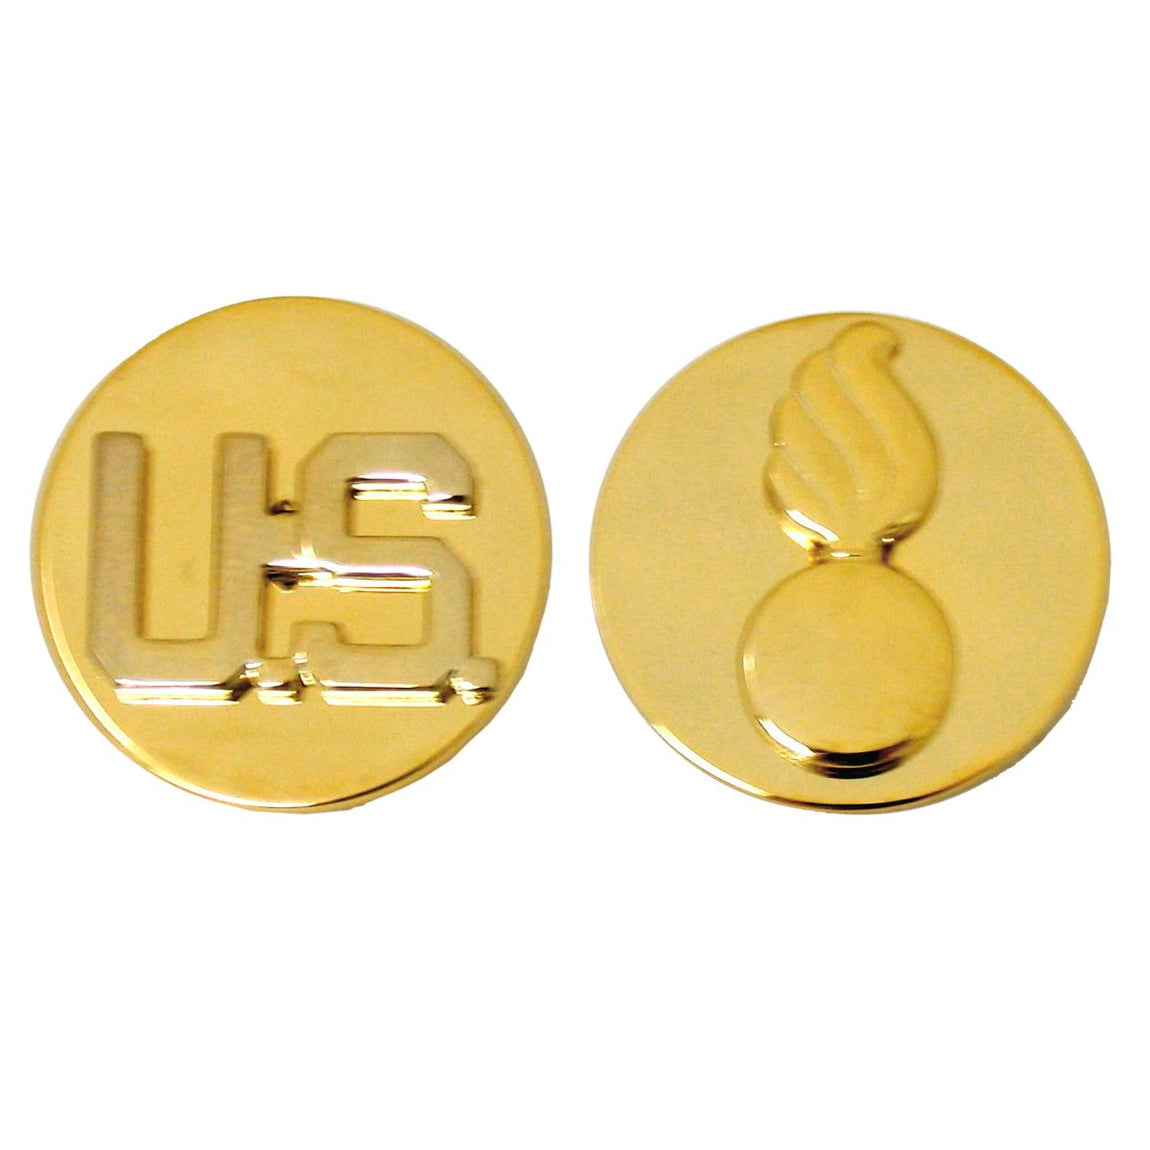 Ordnance Branch Insignia Army Enlisted and US Gold Collar Pins